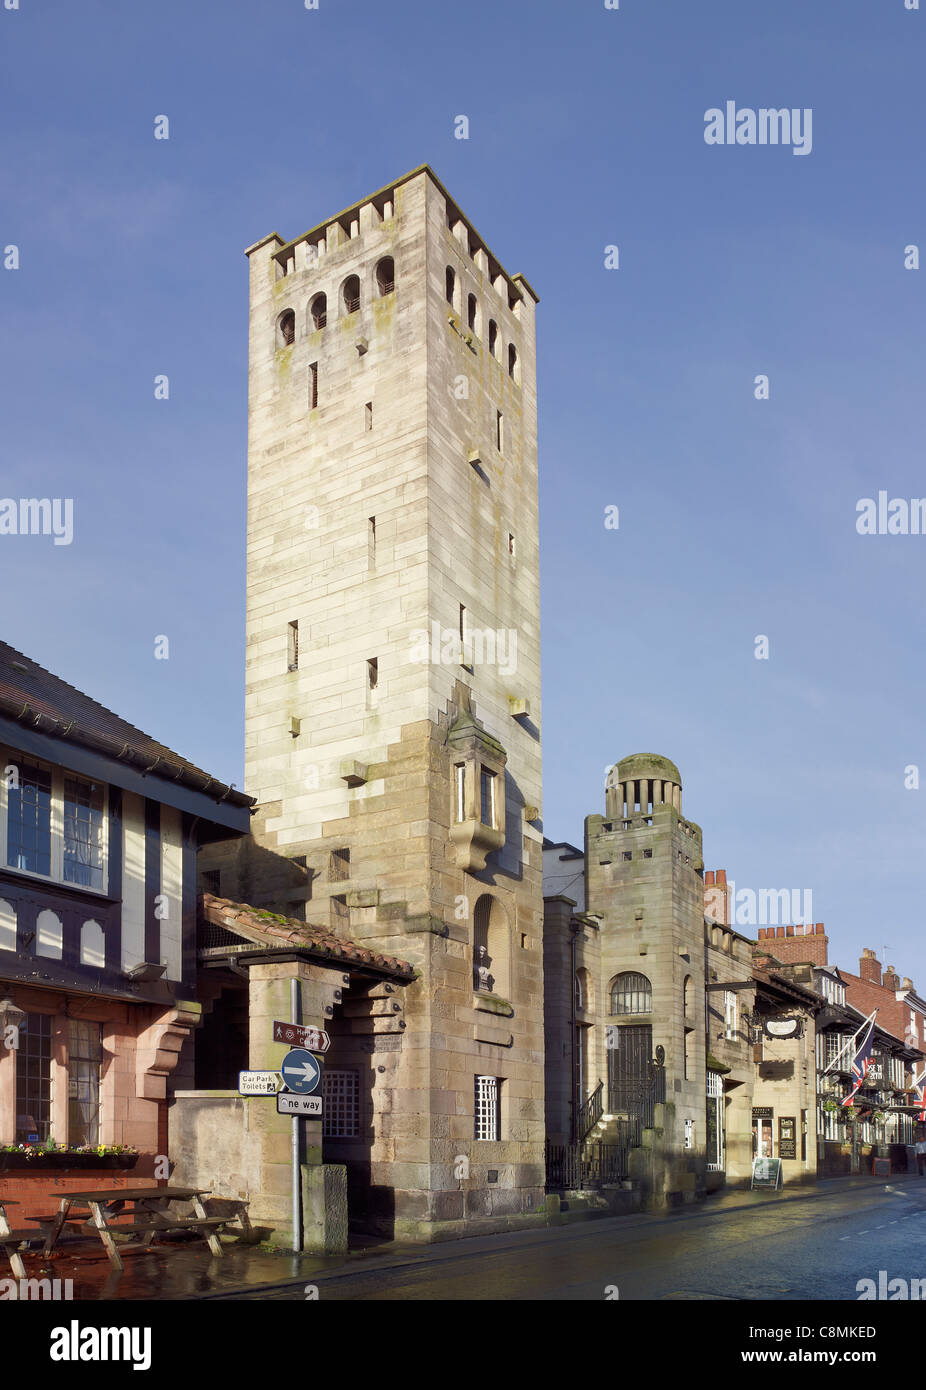 Gaskell Memorial Tower, Knutsford, Cheshire Foto Stock